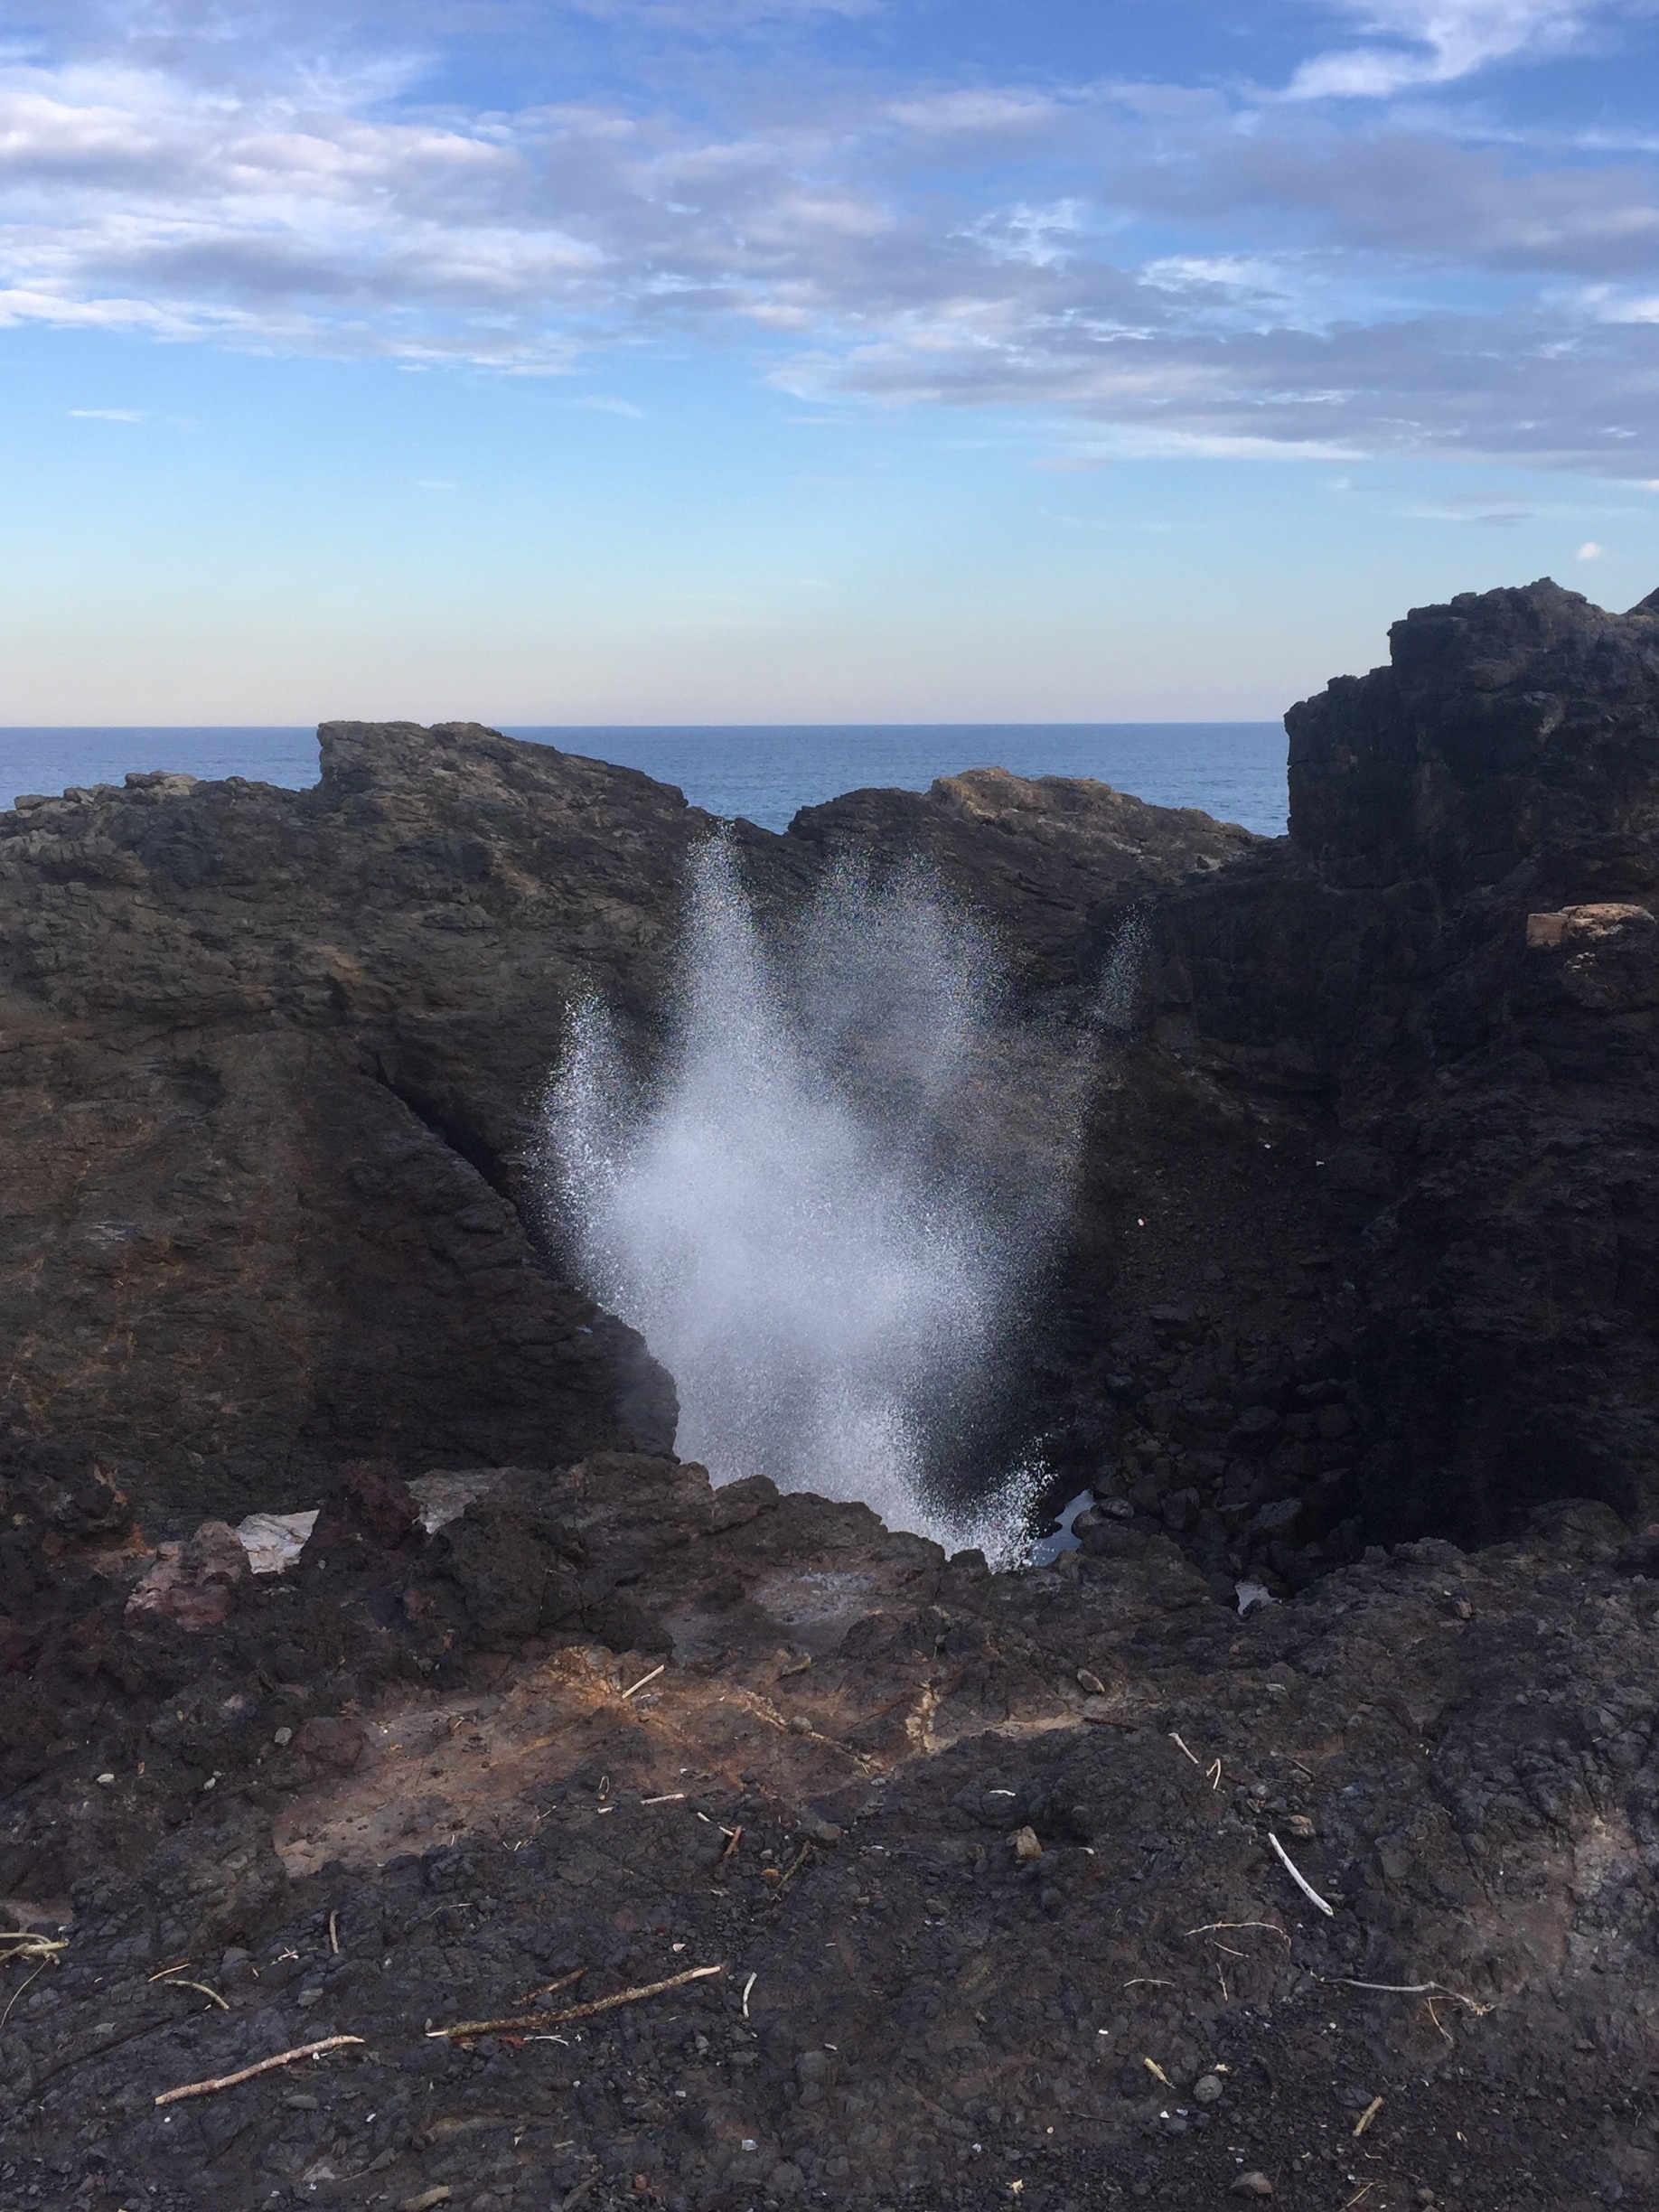 We had a lucky day today to witness this magnificent blow hole at kiama, near Sydney, Australia. The sea water gushes through this natural hole and erupts to dizzying heights, sometimes even splashing on us. 
Natures wonder.